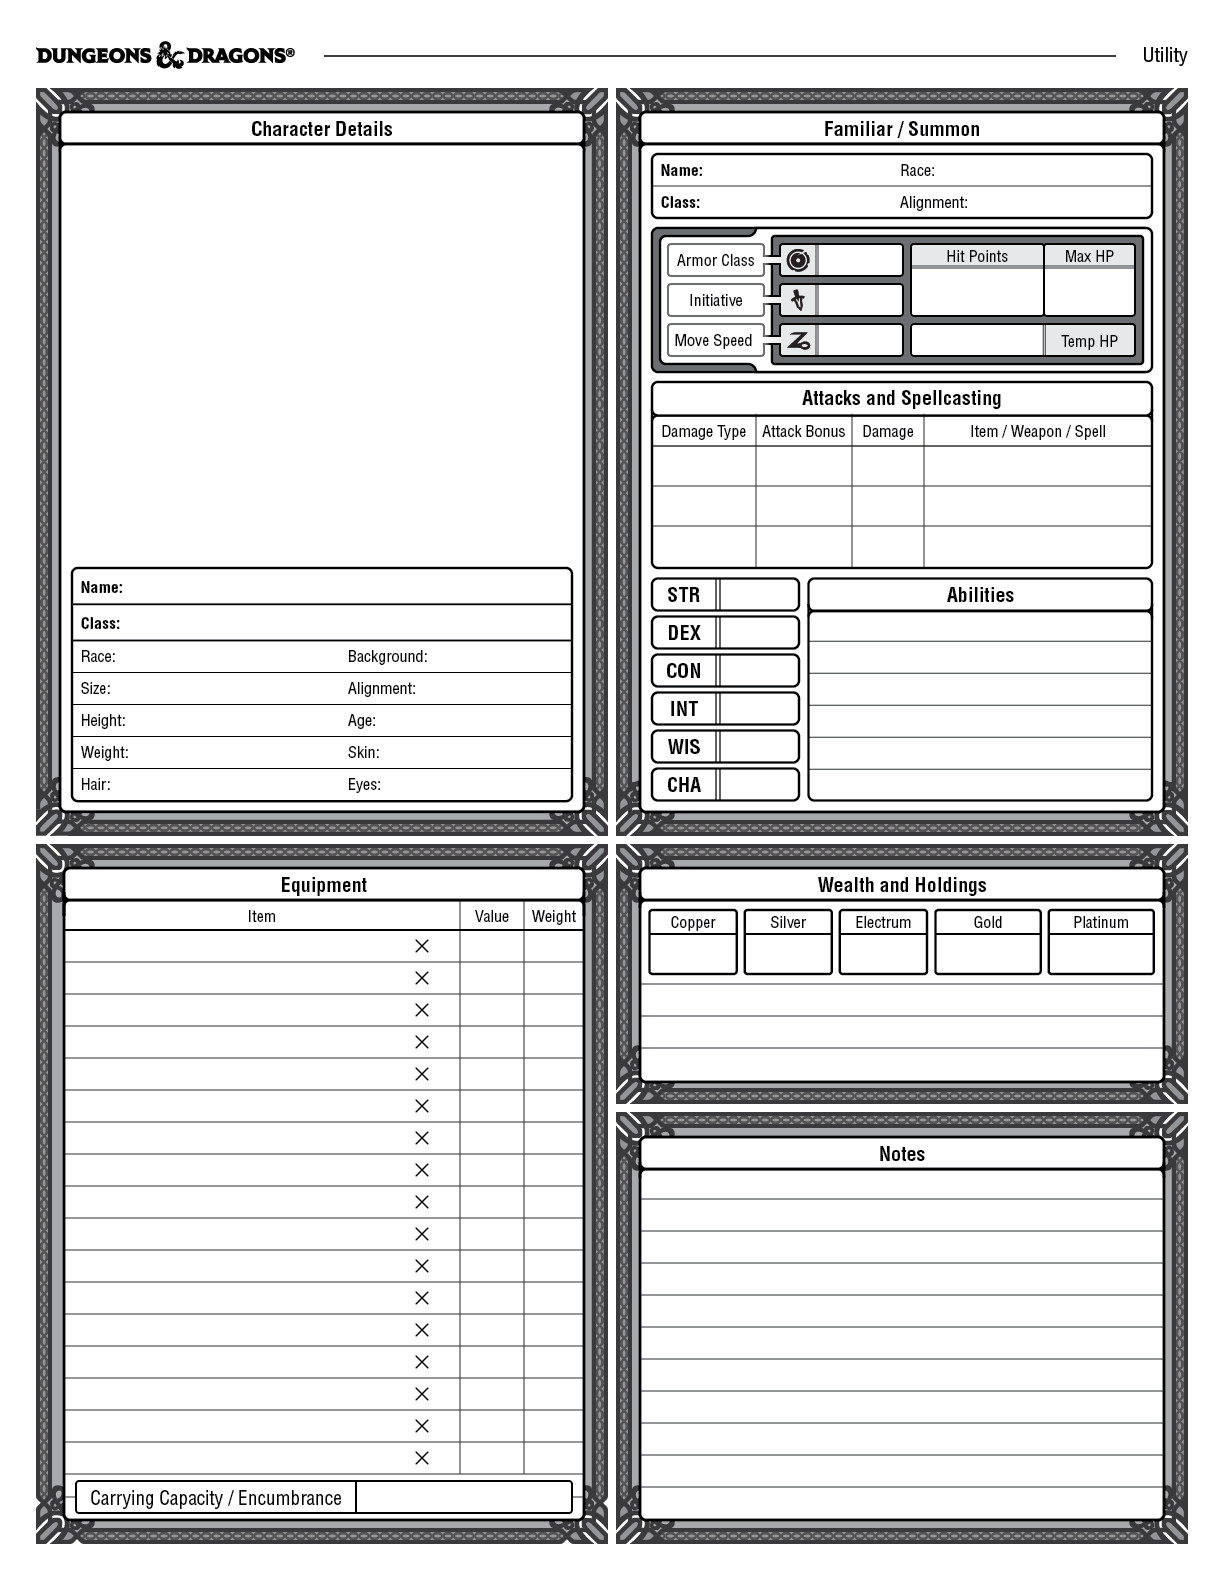 William Lu - Character Sheet for D&D 5th Edition